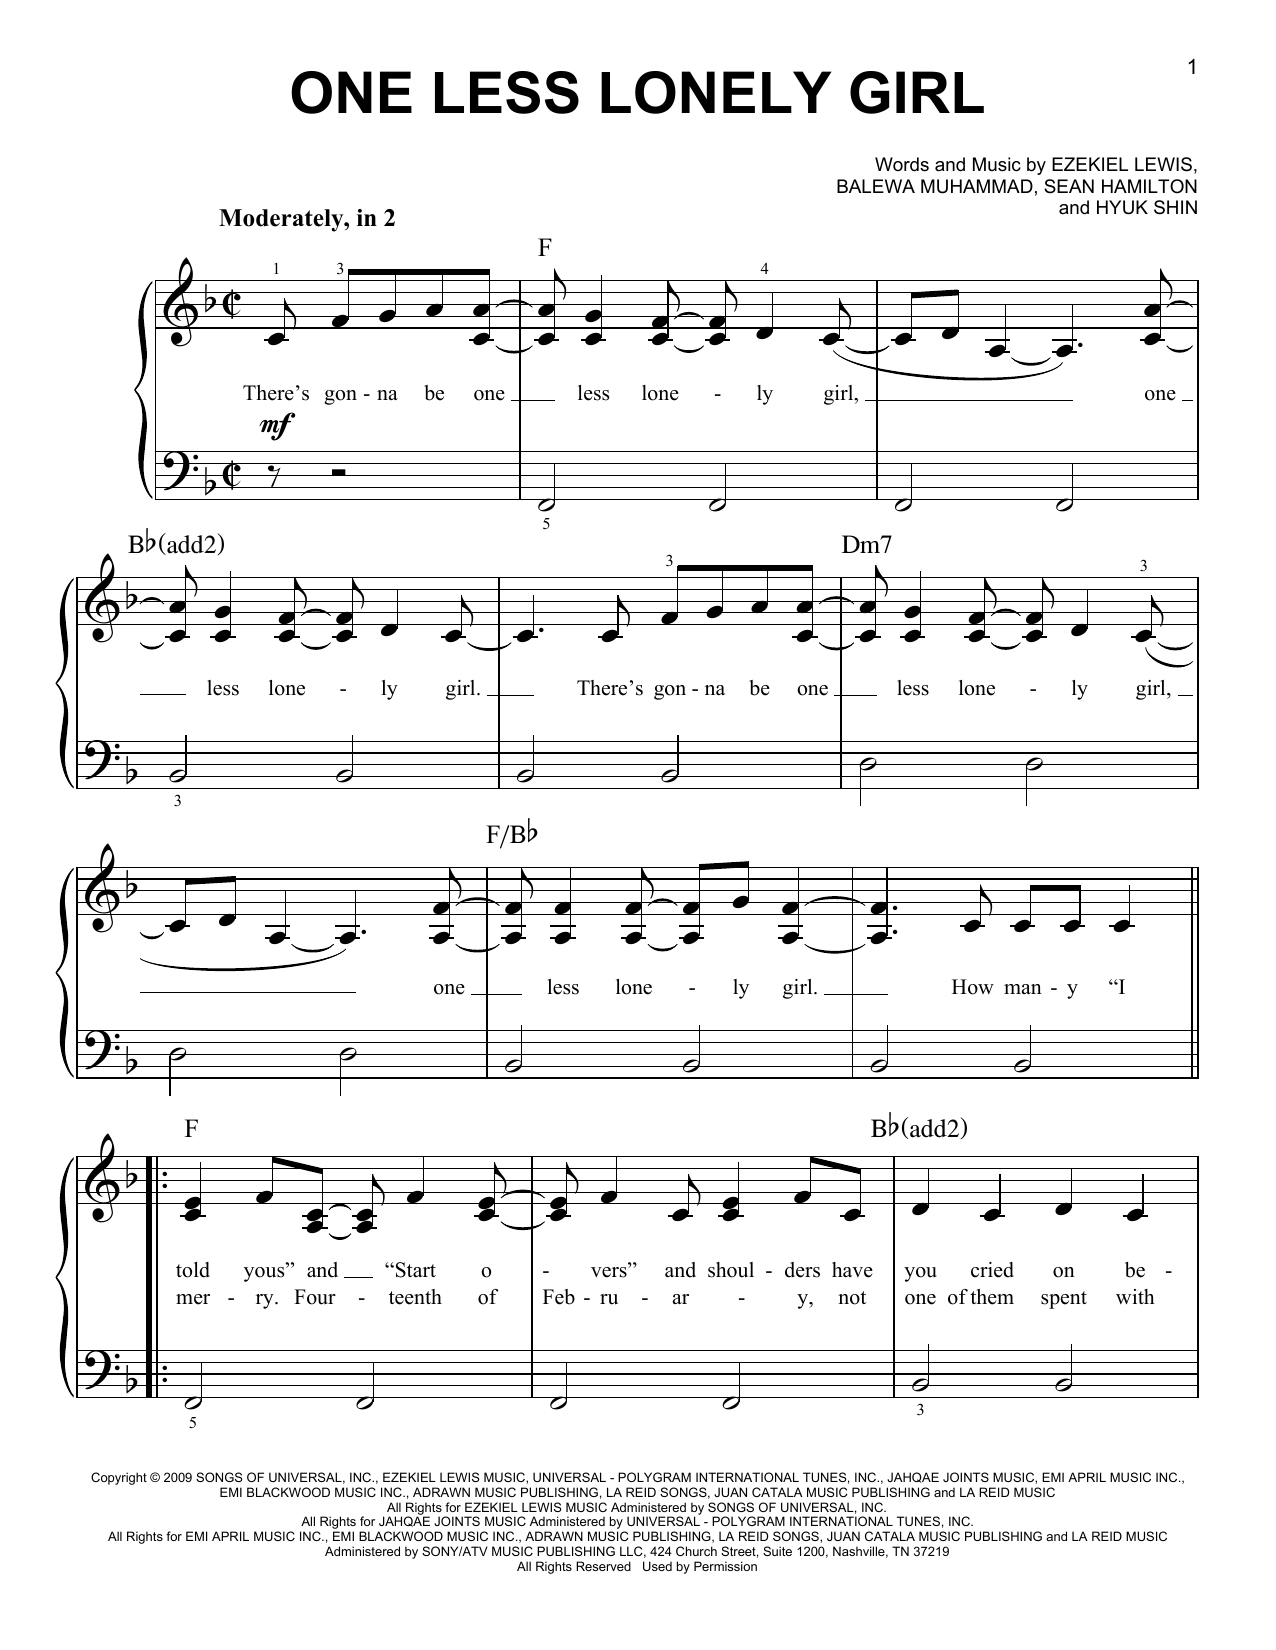 Download Justin Bieber One Less Lonely Girl Sheet Music